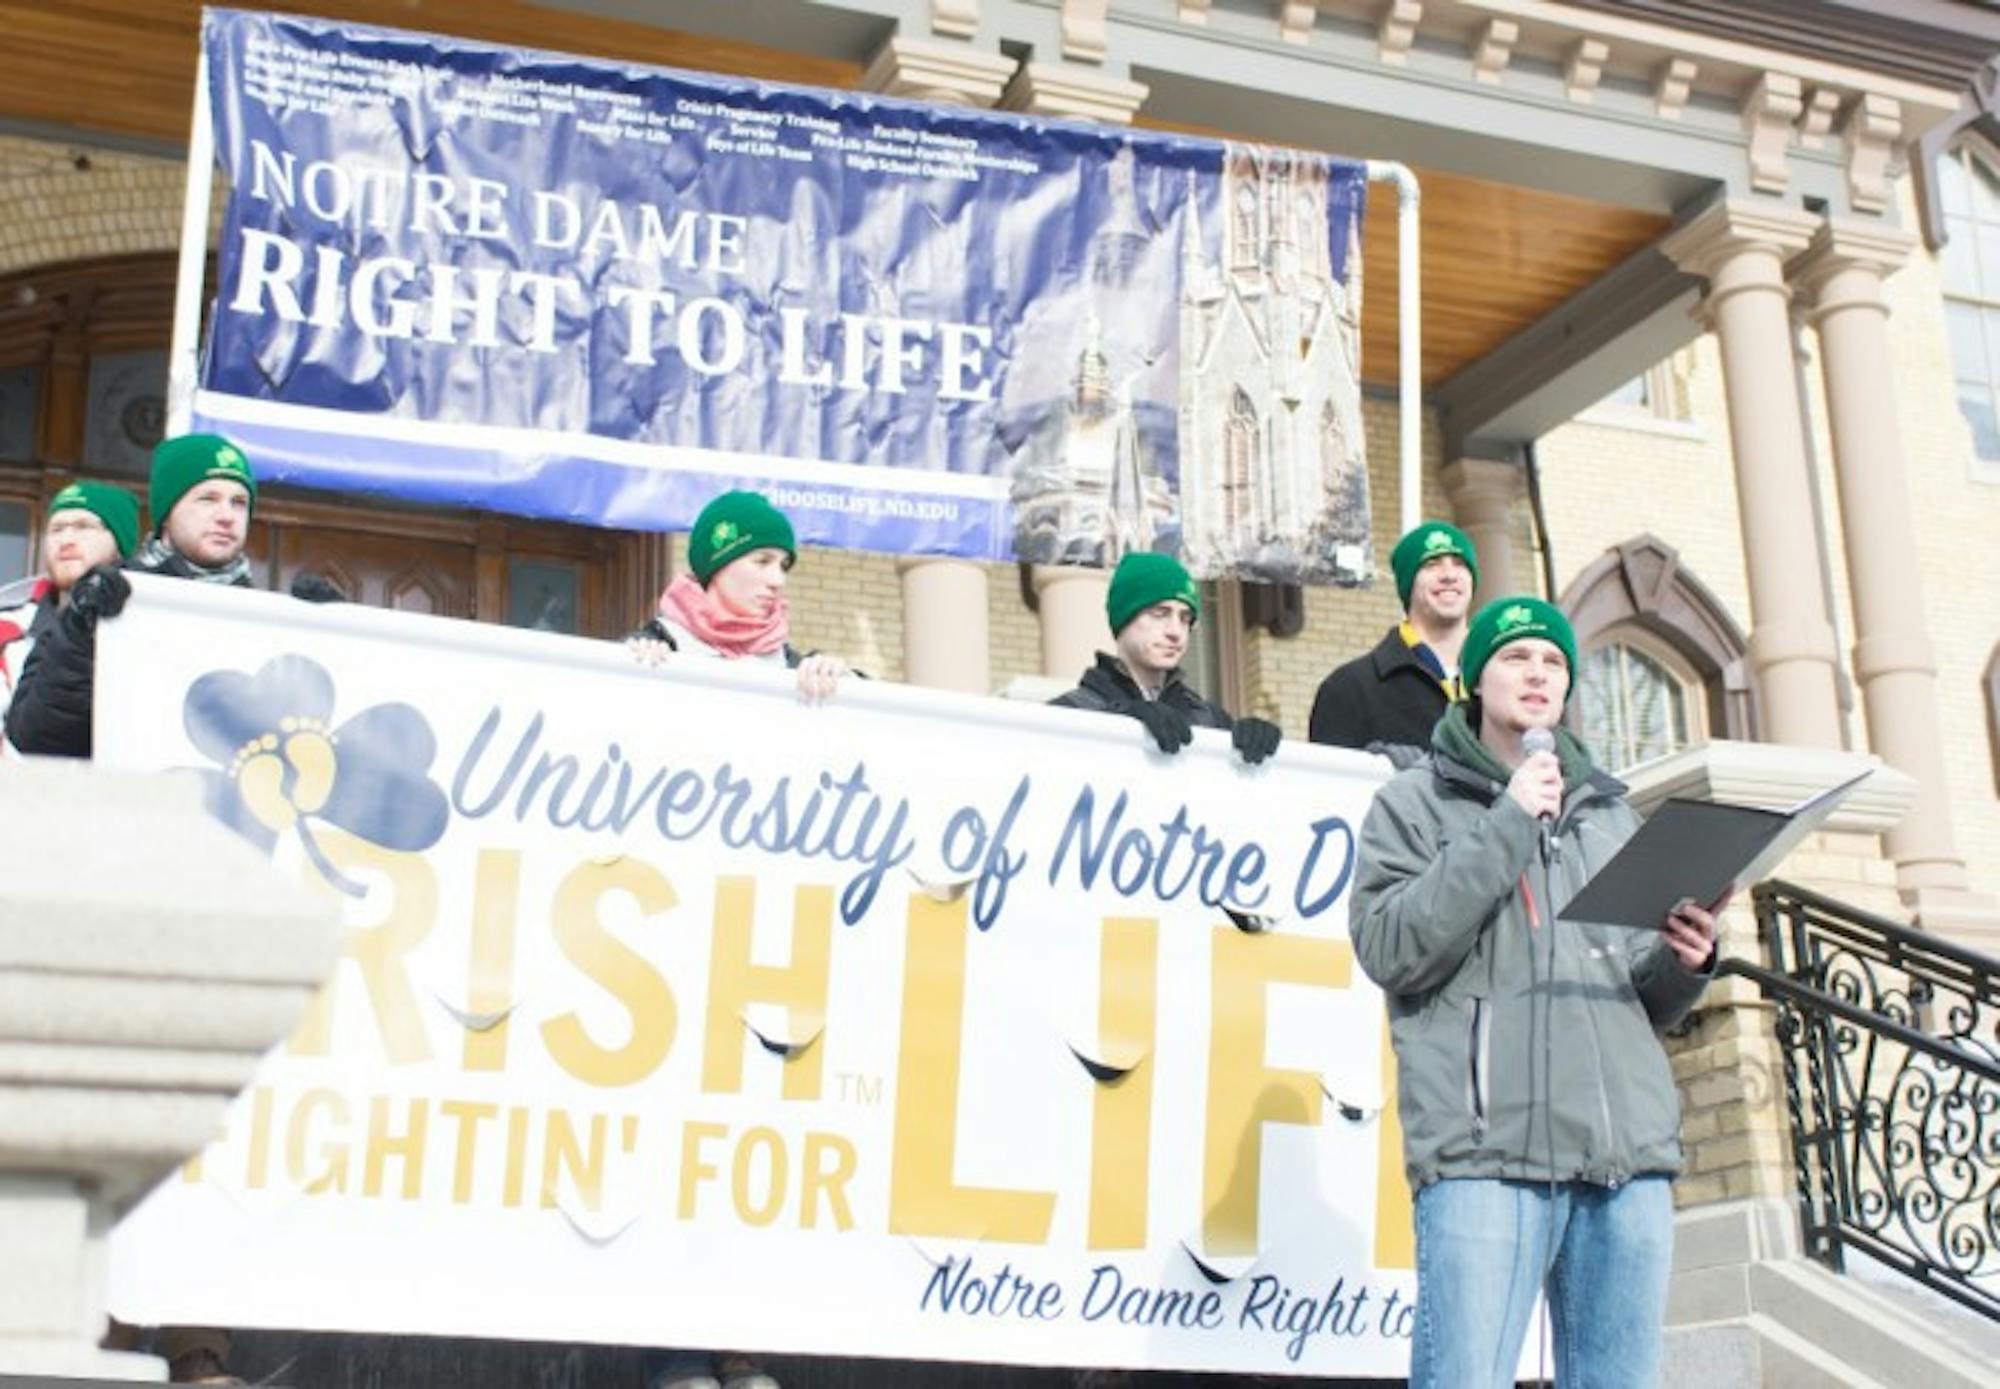 Members of Right to Life gather on campus for the March for Life rally last January after canceling its annual trip to Washington, D.C. for the national event due to weather. The group hopes to attend this year's rally, as well as put on a number of other events.